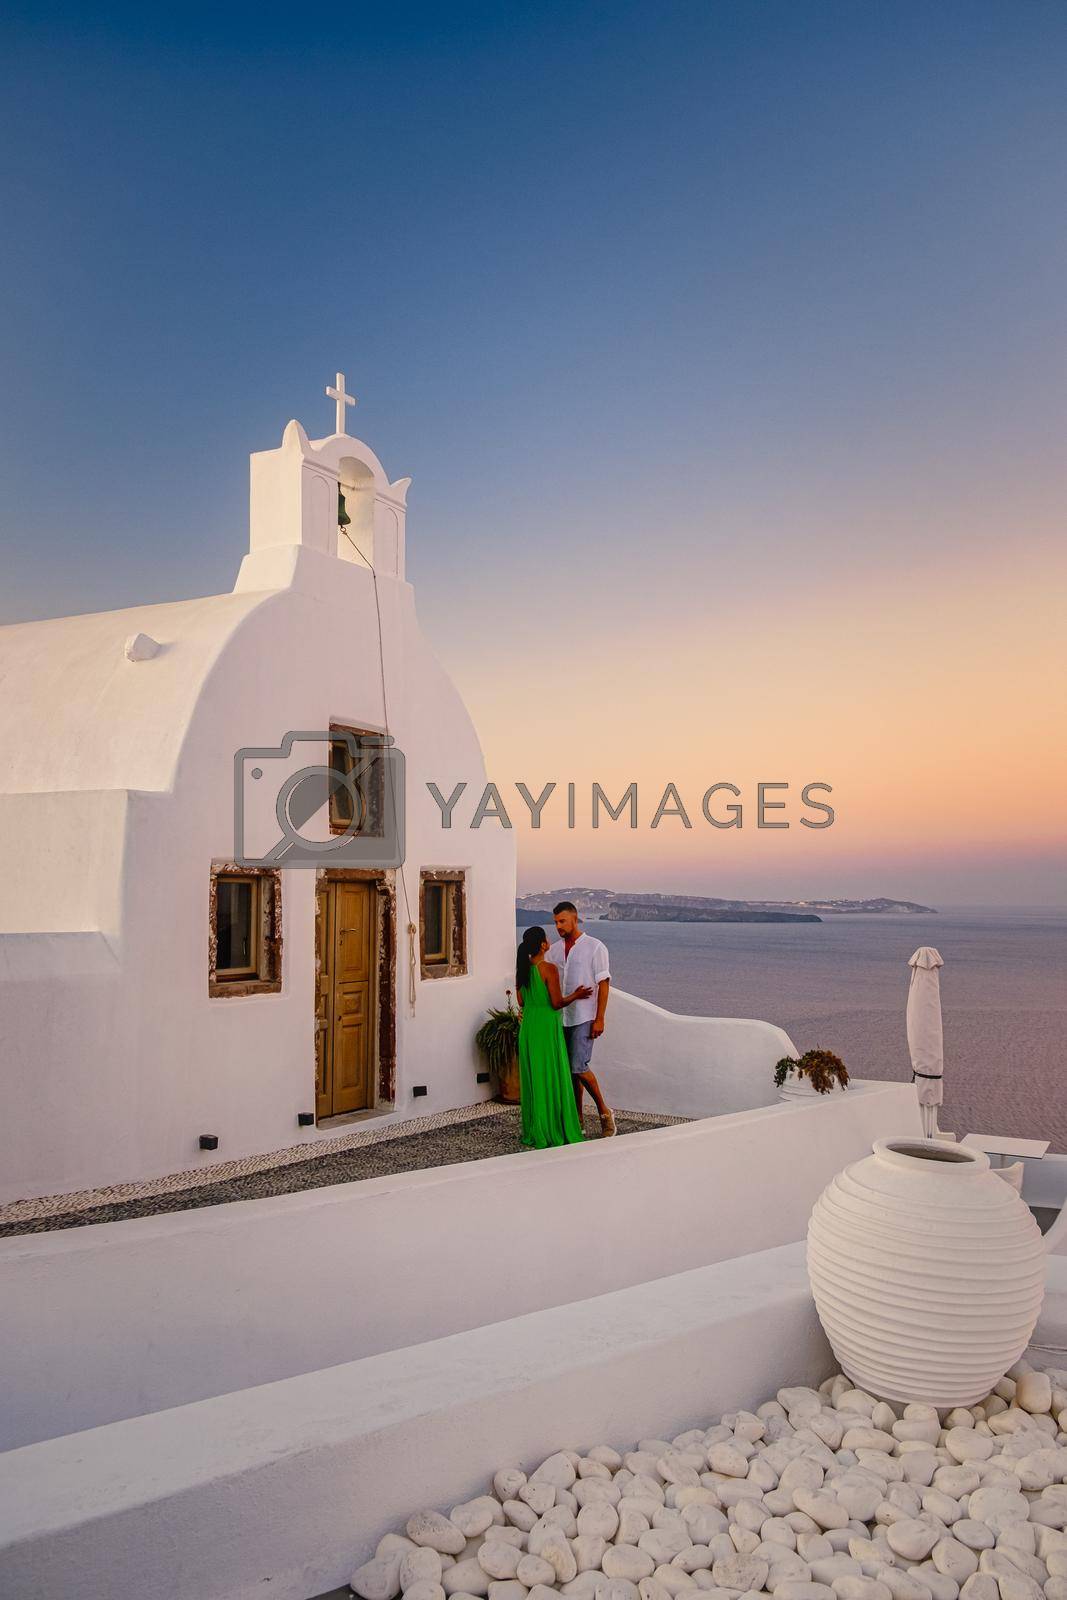 Royalty free image of Santorini Greece, young couple mid age European and Asian on vacation at the Greek village of Oia Santorini Greece, luxury vacation Santorini by fokkebok